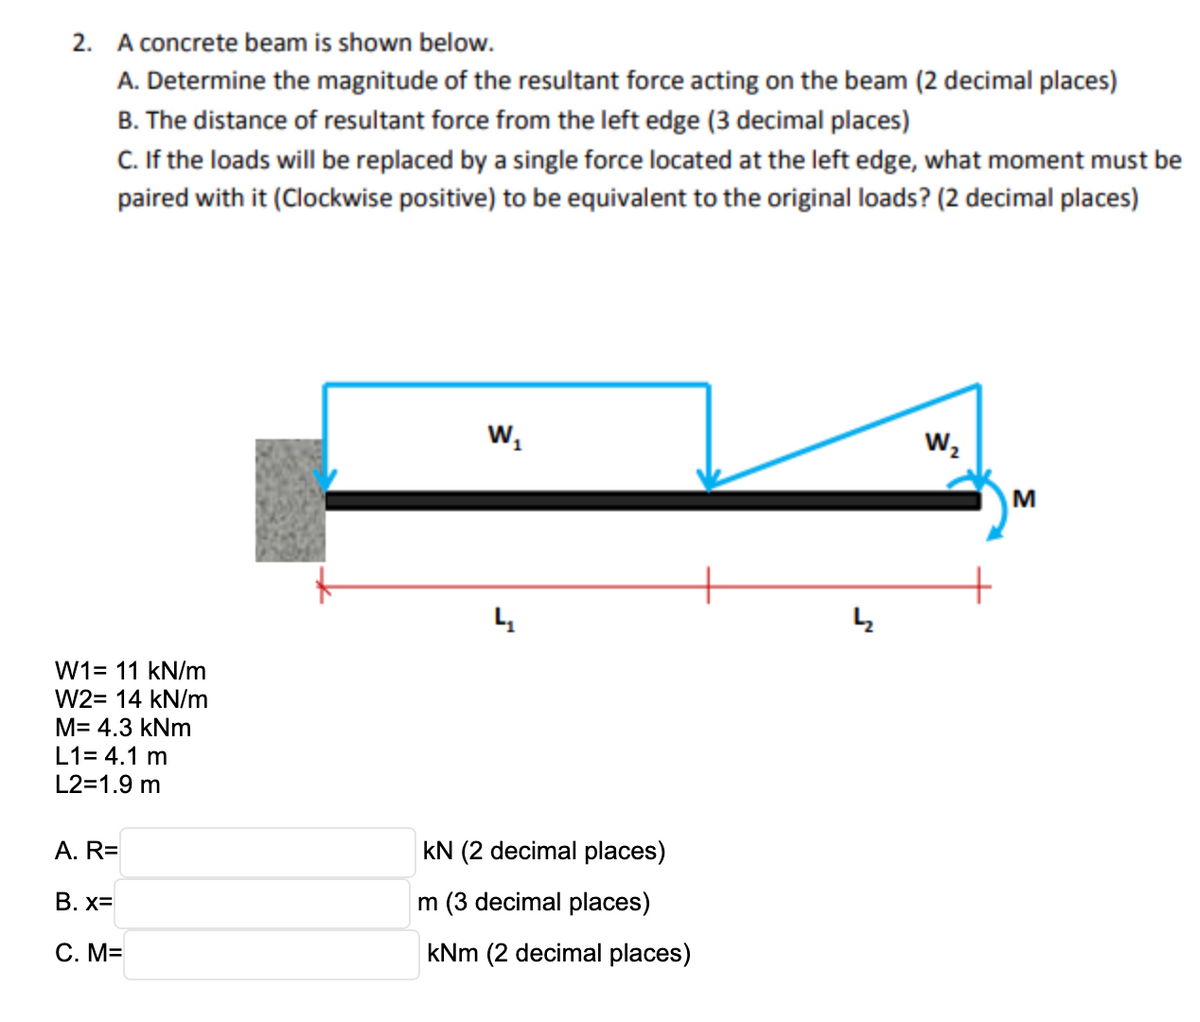 2. A concrete beam is shown below.
A. Determine the magnitude of the resultant force acting on the beam (2 decimal places)
B. The distance of resultant force from the left edge (3 decimal places)
C. If the loads will be replaced by a single force located at the left edge, what moment must be
paired with it (Clockwise positive) to be equivalent to the original loads? (2 decimal places)
Ws
Wz
M
W1= 11 kN/m
W2= 14 kN/m
M= 4.3 kNm
L1= 4.1 m
L2=1.9 m
A. R=
kN (2 decimal places)
В. х3
m (3 decimal places)
С. М3
kNm (2 decimal places)
